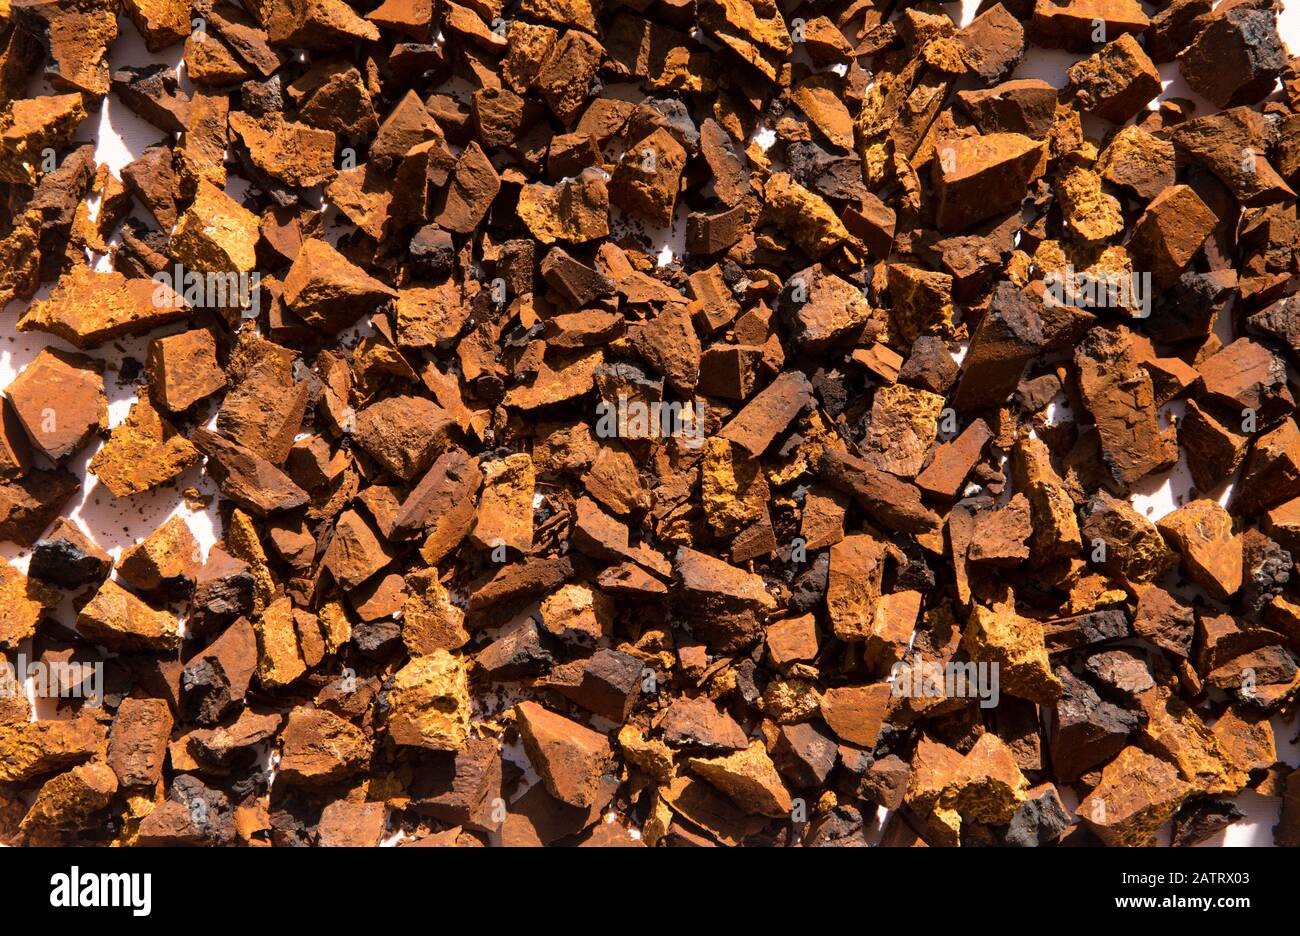 Healthy pure wild natural chaga mushroom, Inonotus obliquus pieces drying in the sun, covering whole background. Stock Photo